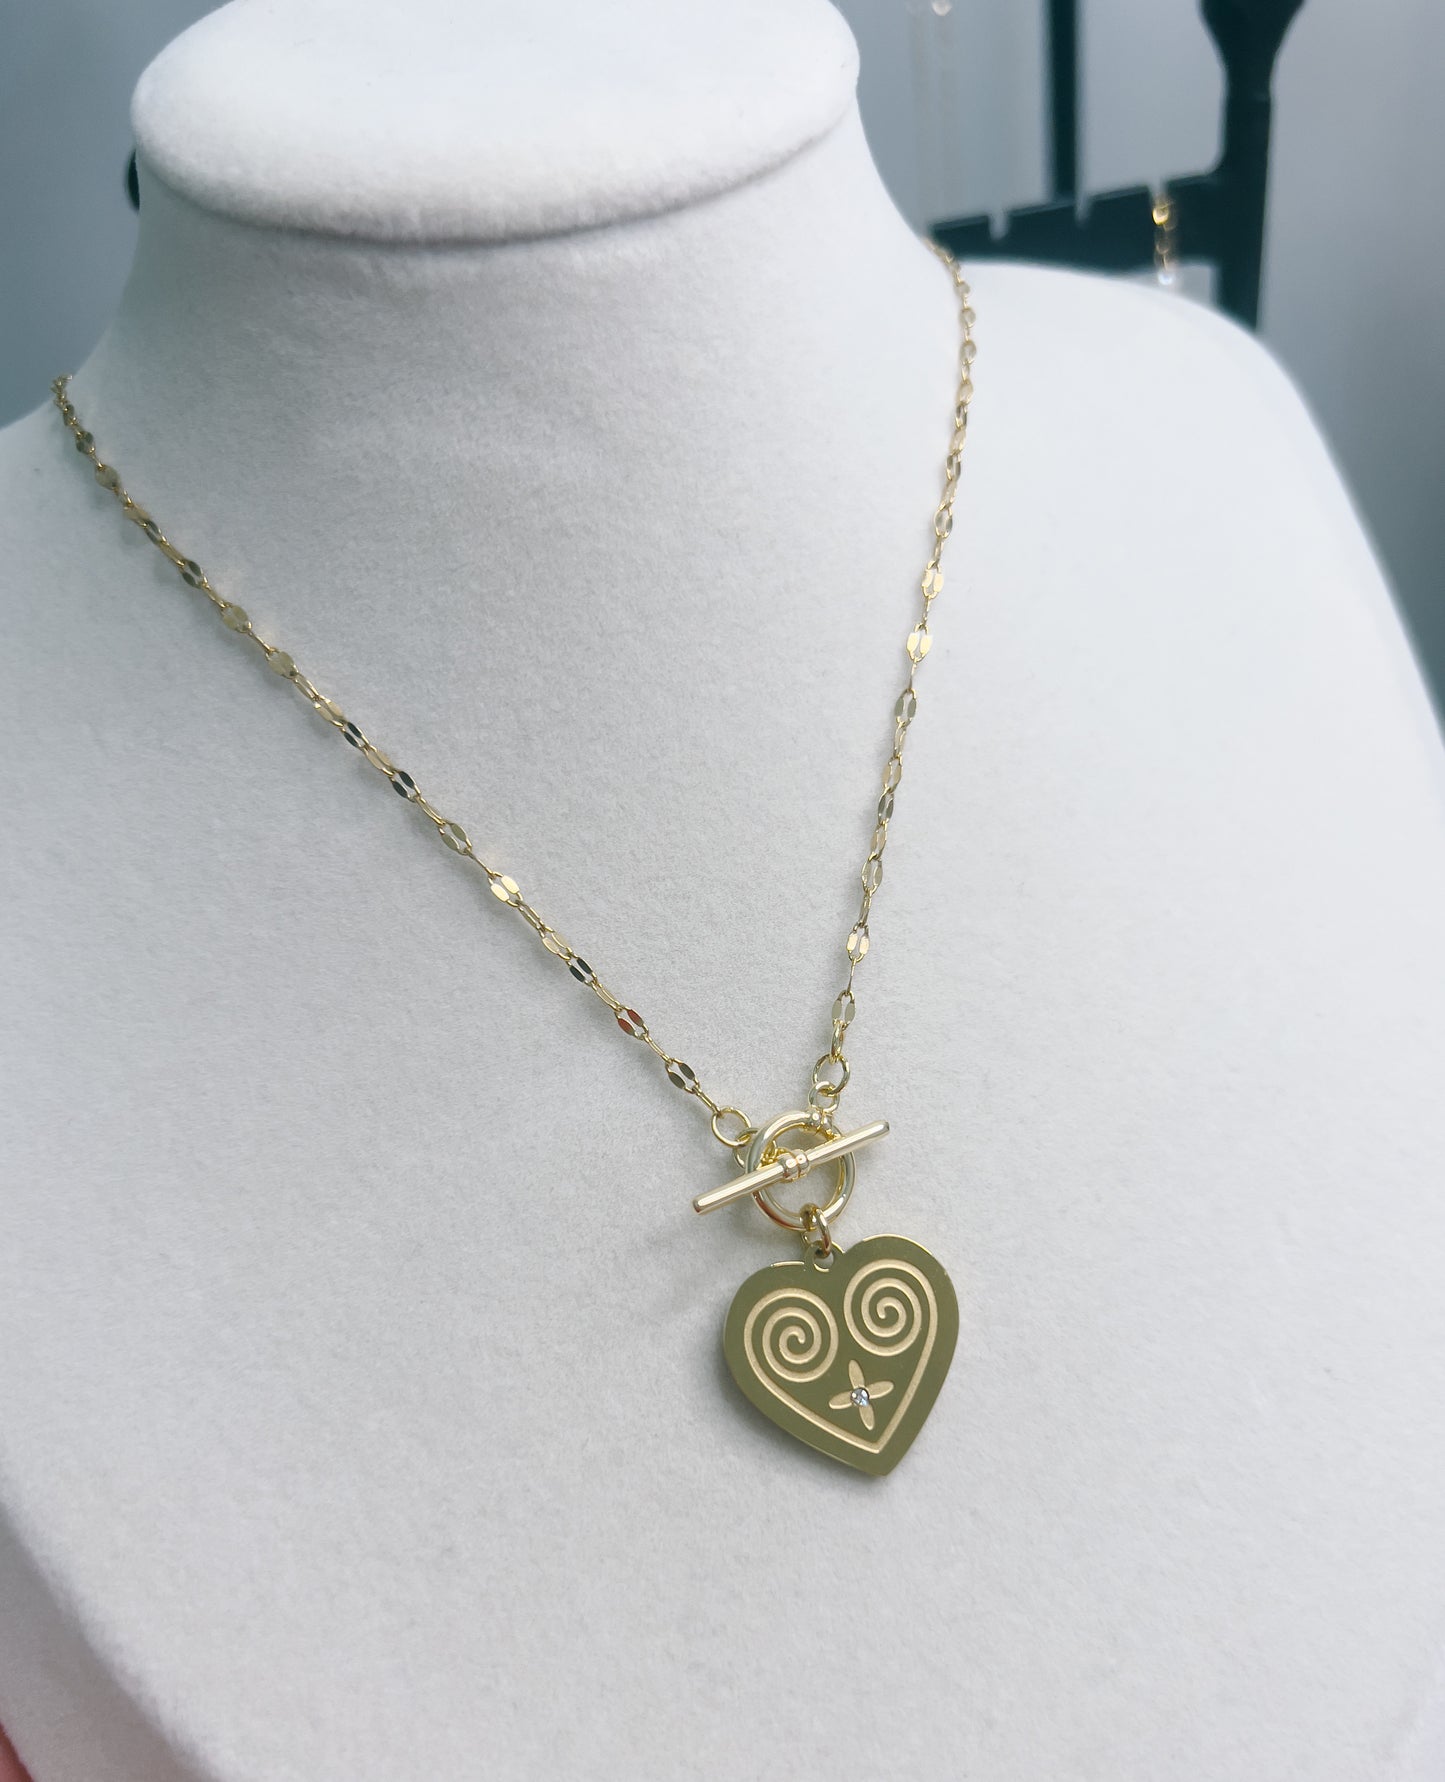 N18 - HMONG HEART NECKLACE